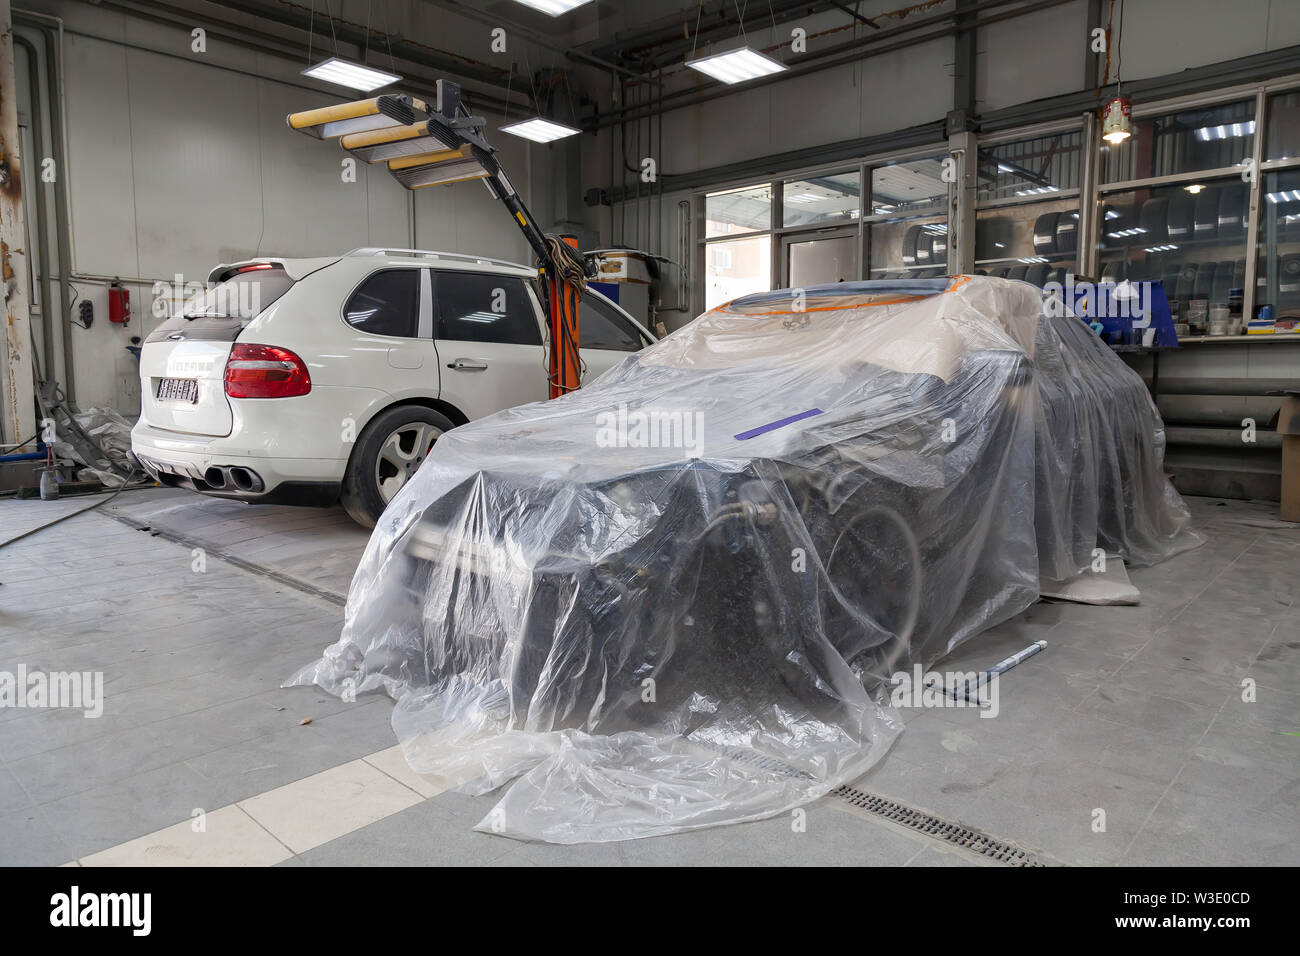 A bluse sedan car is completely covered in film and adhesive tape to  protect against splash during painting after an accident in a workshop for  body r Stock Photo - Alamy